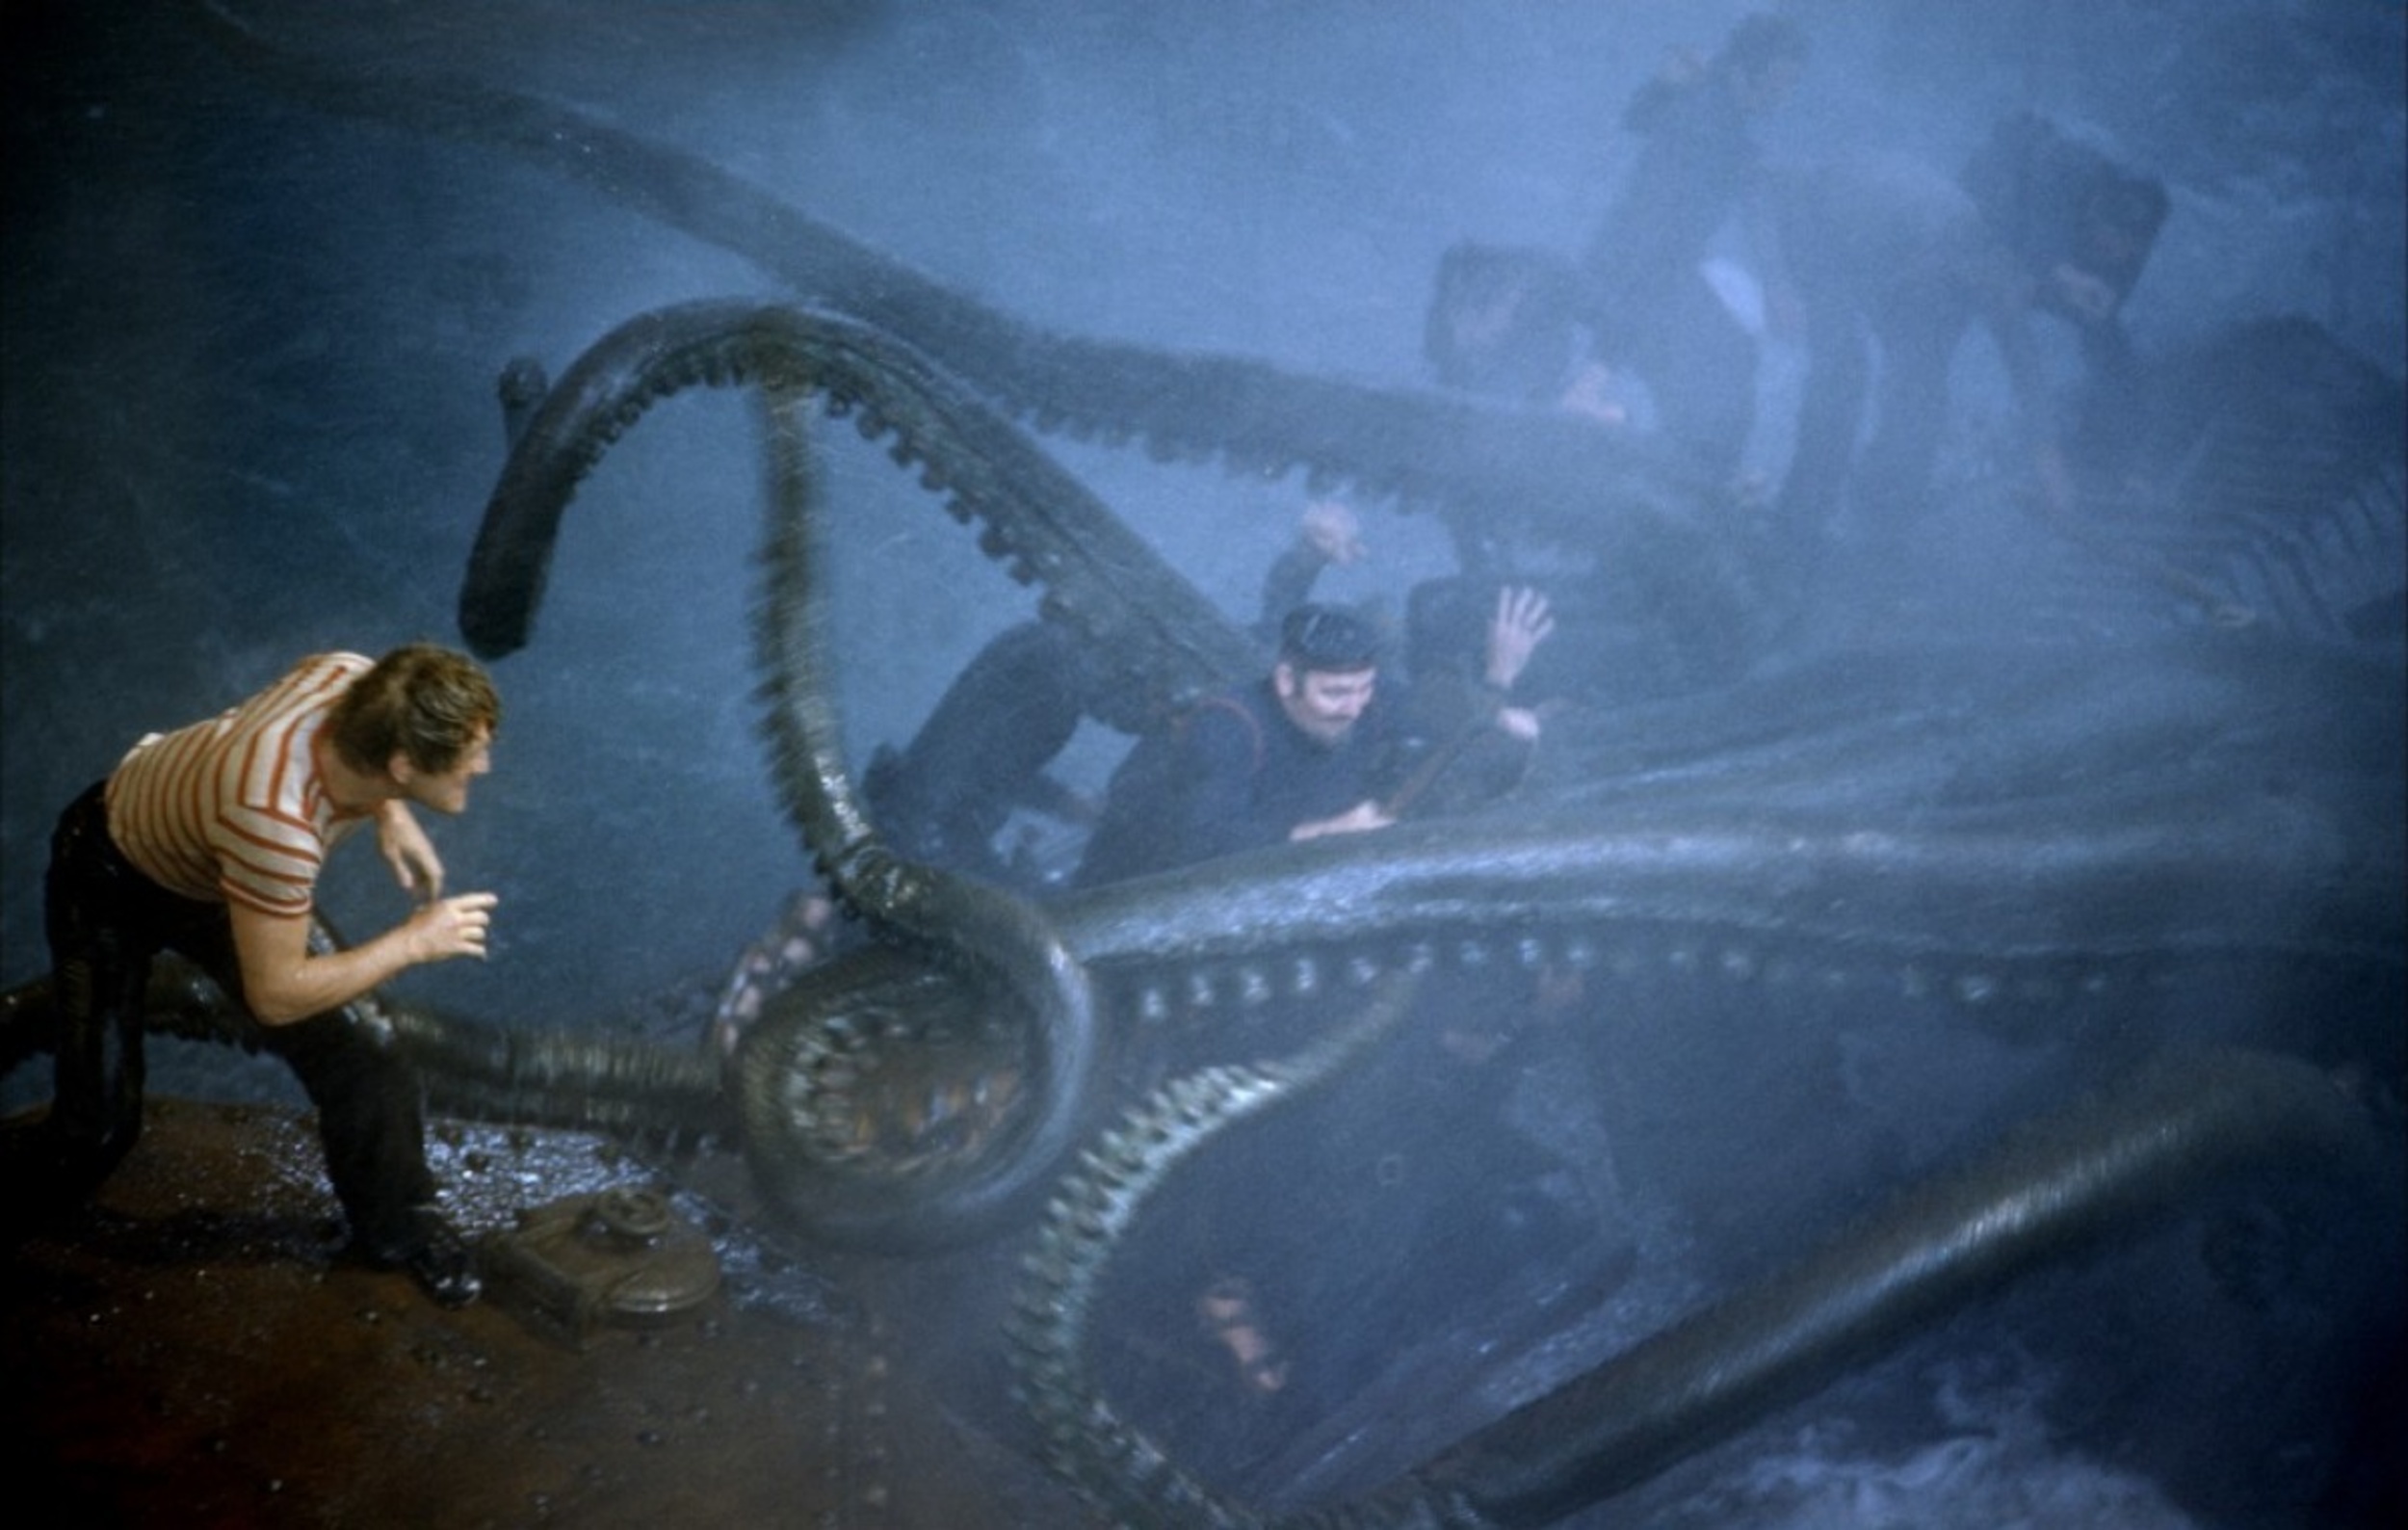 <p>Jules Verne's classic novel is one of those fantastic epics that Hollywood seemingly could not truly replicate on the big screen, but Disney was established and well-funded enough to take on the task. </p><p>Disney's adaptation of <em>20,000 Leagues Under the Seat</em> was the first live-action film produced entirely under his studio's banner. It was also the first Disney film to use the groundbreaking CinemaScope lens that could capture the film's biggest moments on an even bigger screen. The special effects budget needed to recreate the famed Nautilus submarine and the epic battle with a 40-foot-long giant squid that required two expensive shots made it one of the most anticipated films of the decade. It also became one of the most ambitious cinematic projects of its time that built its own word of mouth and made it a critical and financial juggernaut. </p><p><a href='https://www.msn.com/en-us/community/channel/vid-cj9pqbr0vn9in2b6ddcd8sfgpfq6x6utp44fssrv6mc2gtybw0us'>Follow us on MSN to see more of our exclusive entertainment content.</a></p>